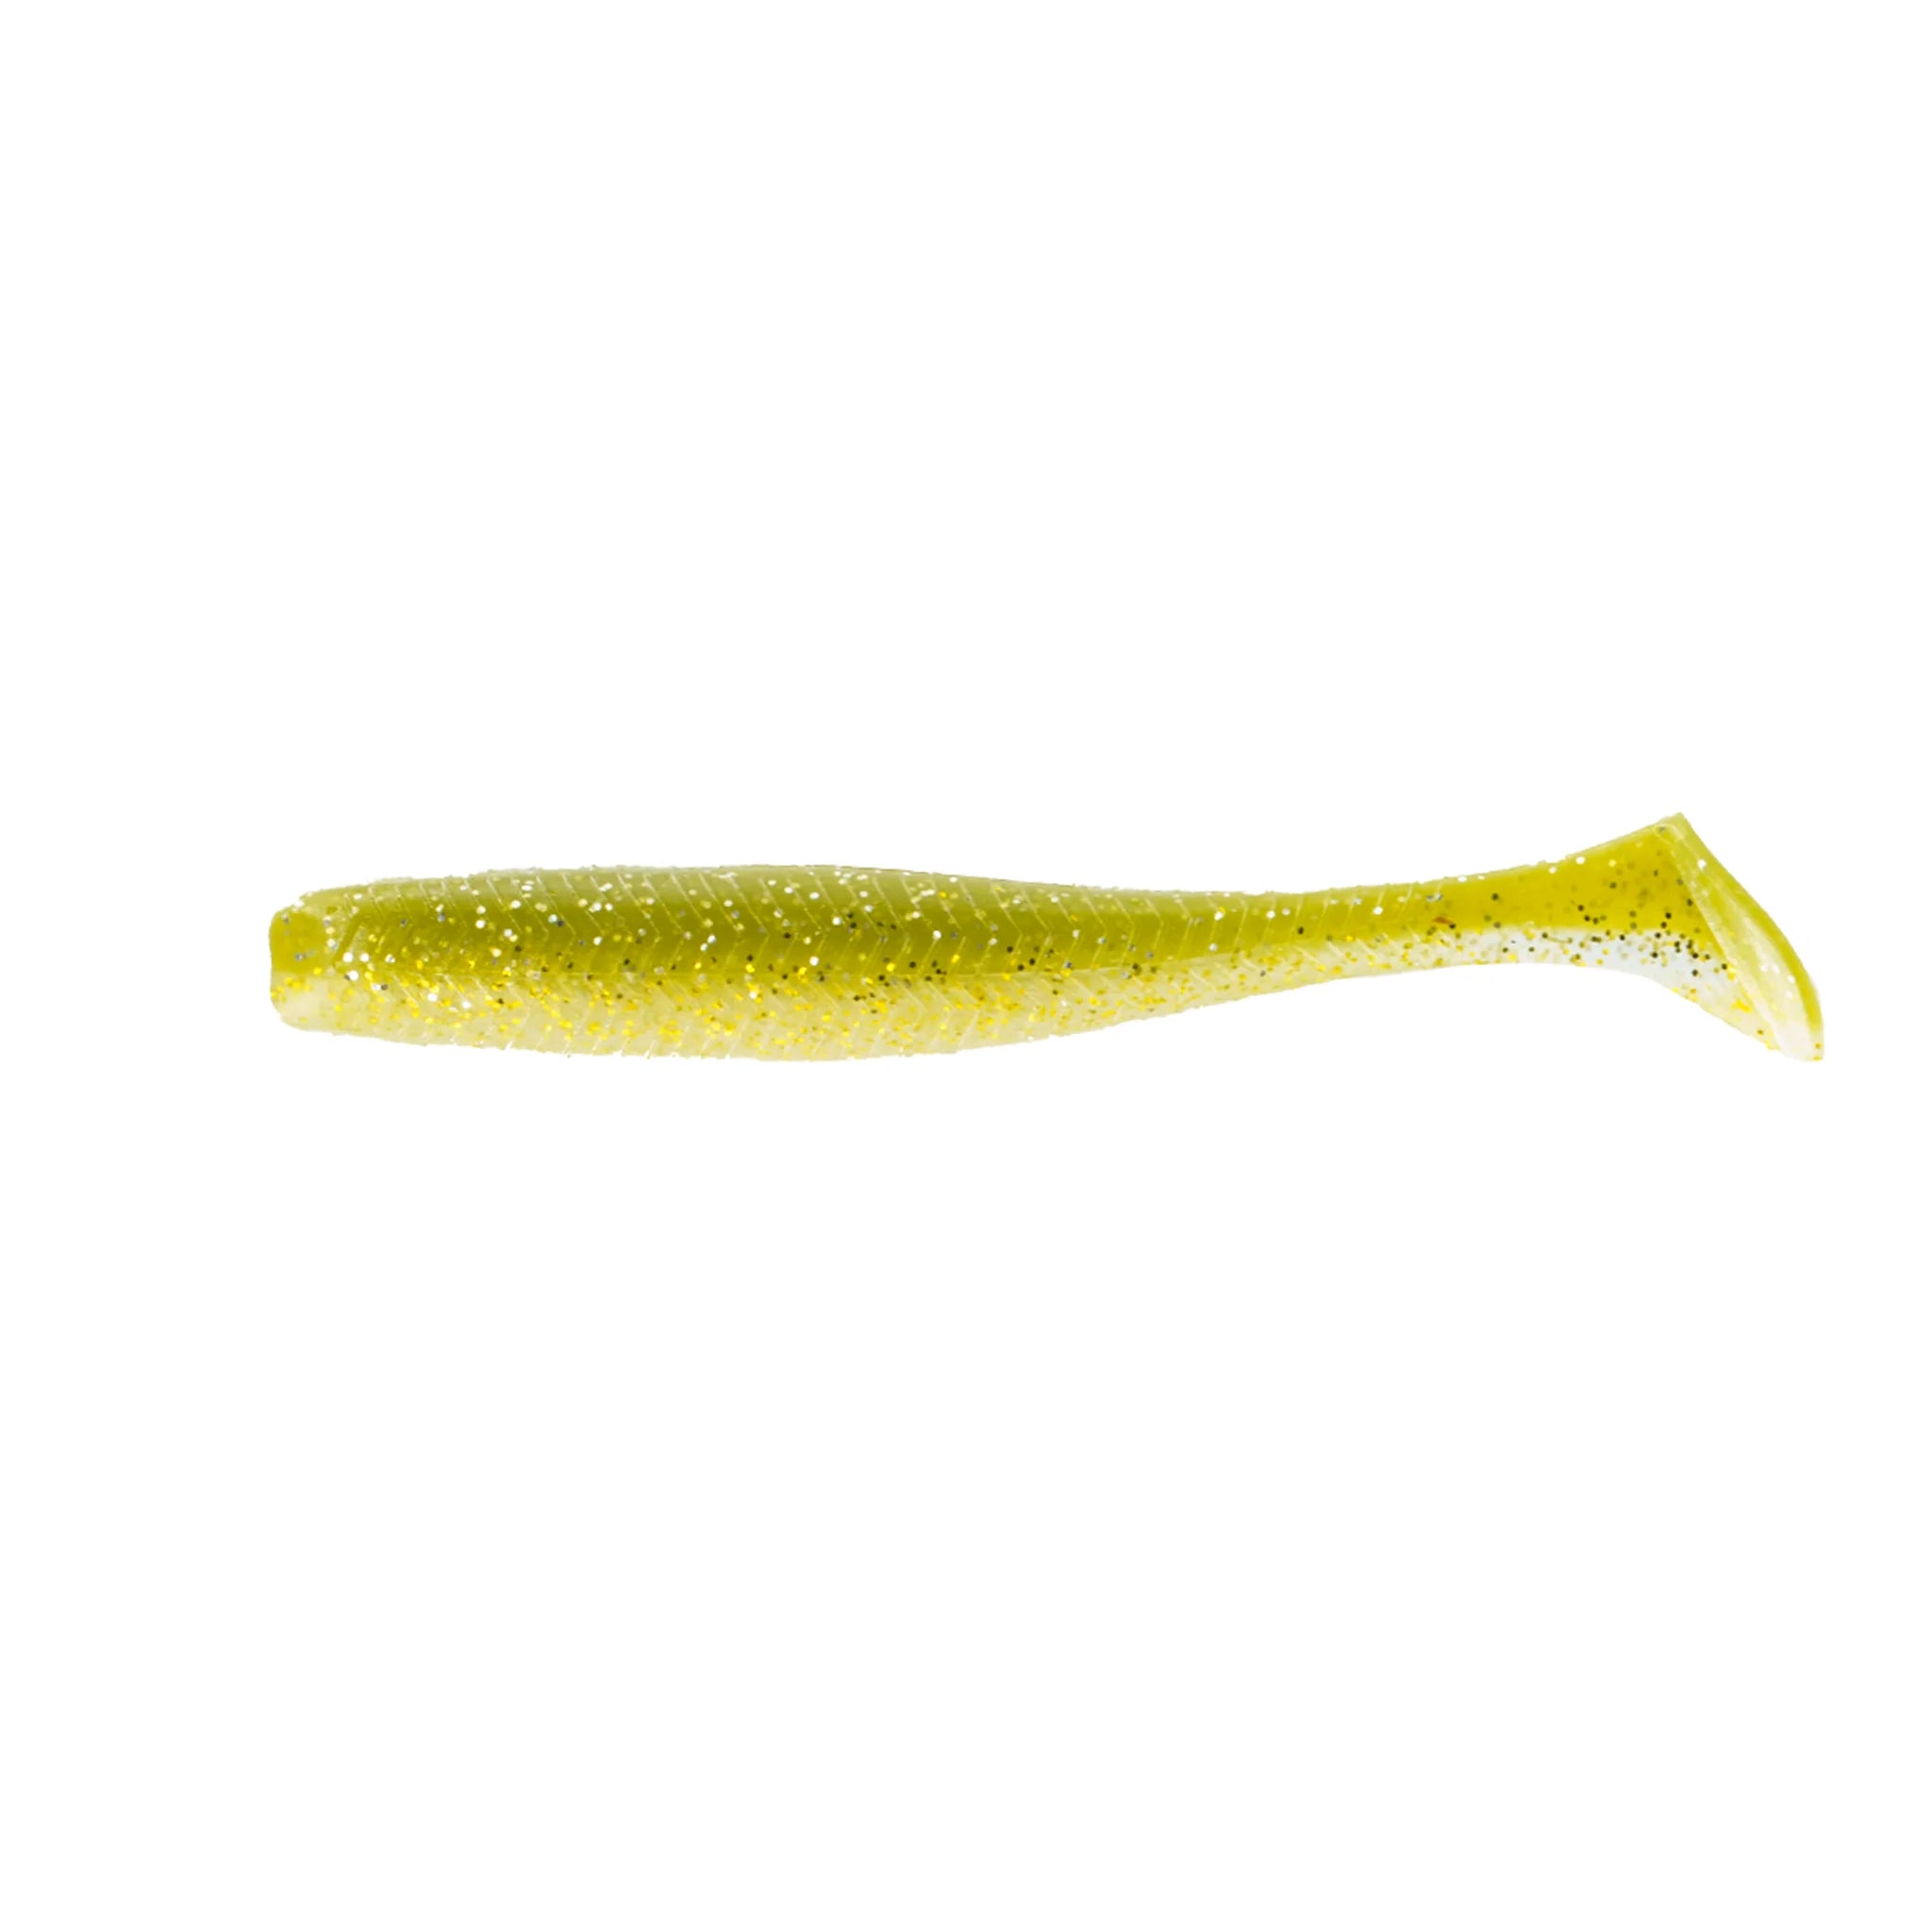 Buy Soft Plastic Worms Online, Bass Fishing Accessories, Soft Plastics  Paddle Tails